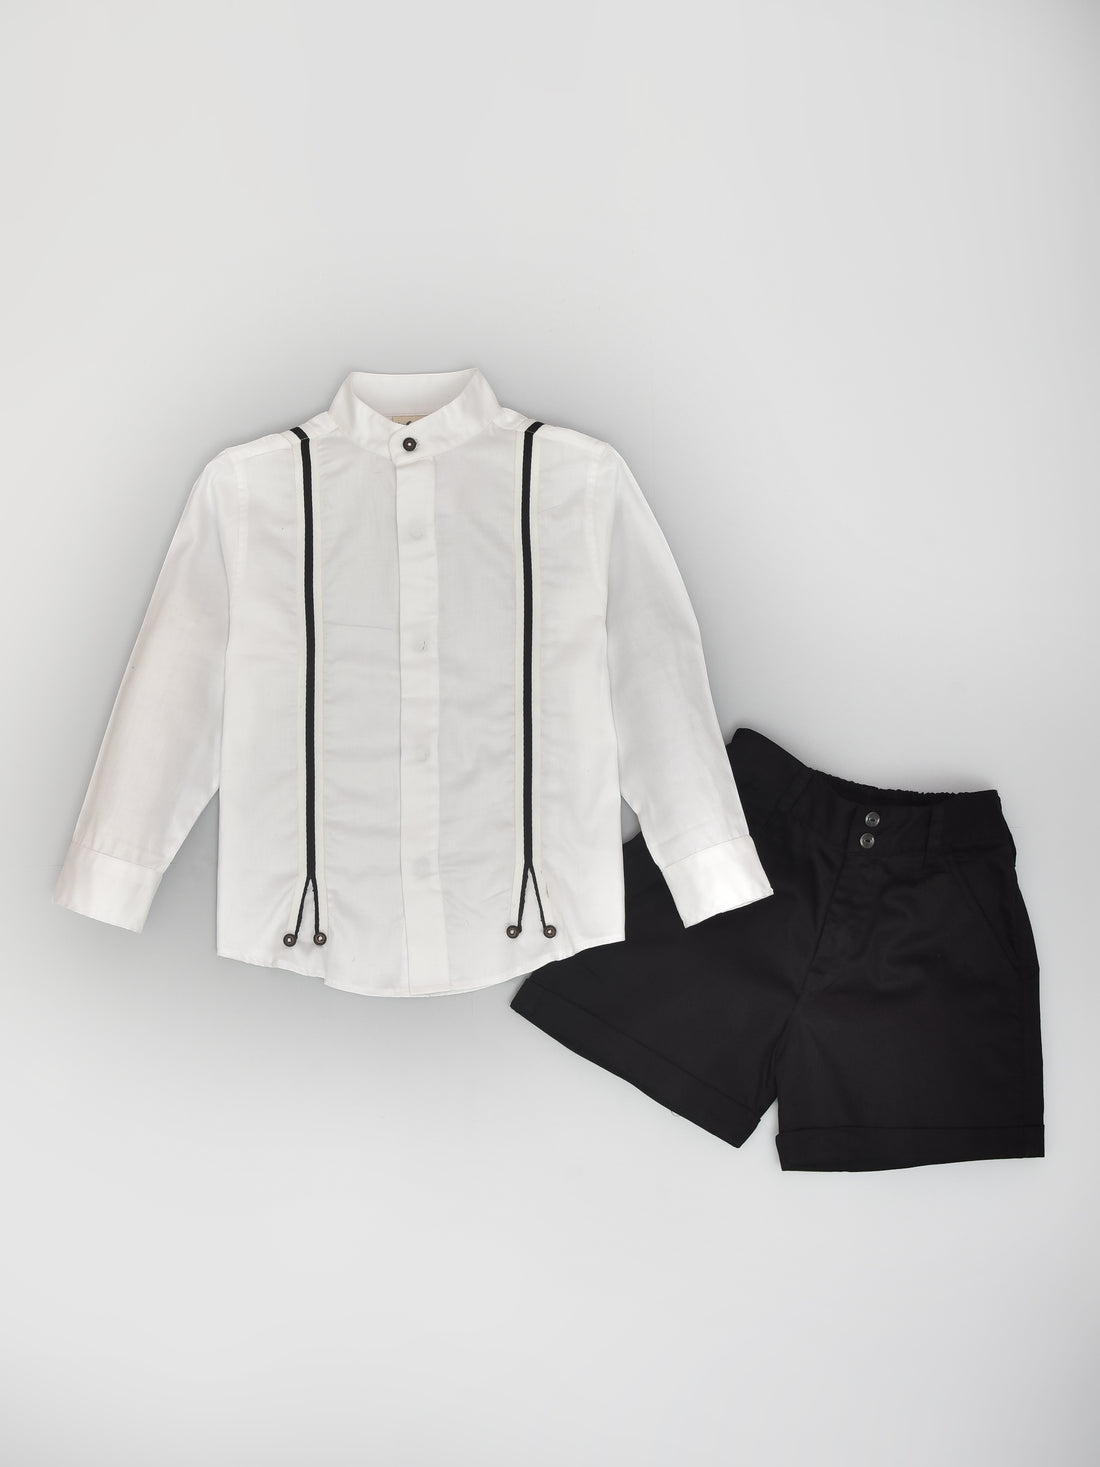 White Shirt With Suspenders & Black Shorts